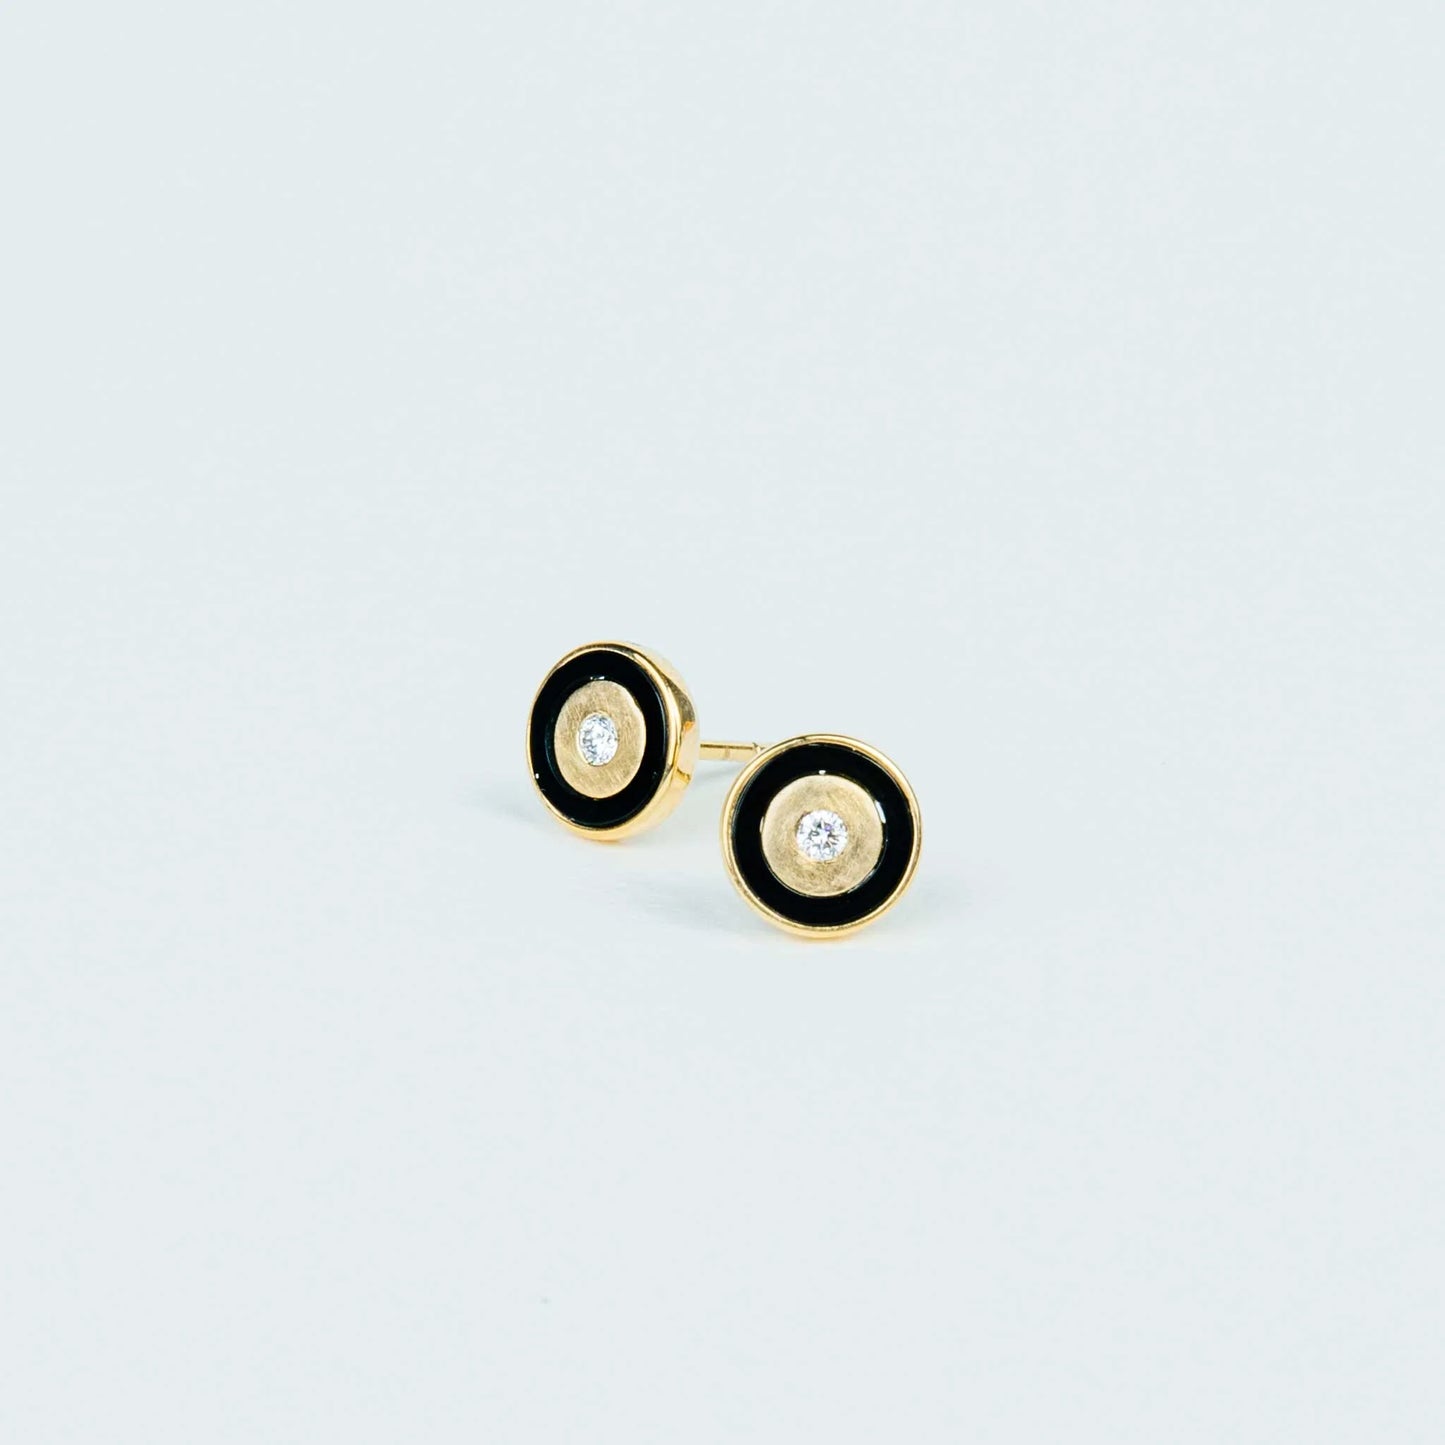 PS ILY ETERNITY EARRINGS IN MOTHER OF PEARL OR ONYX INLAY